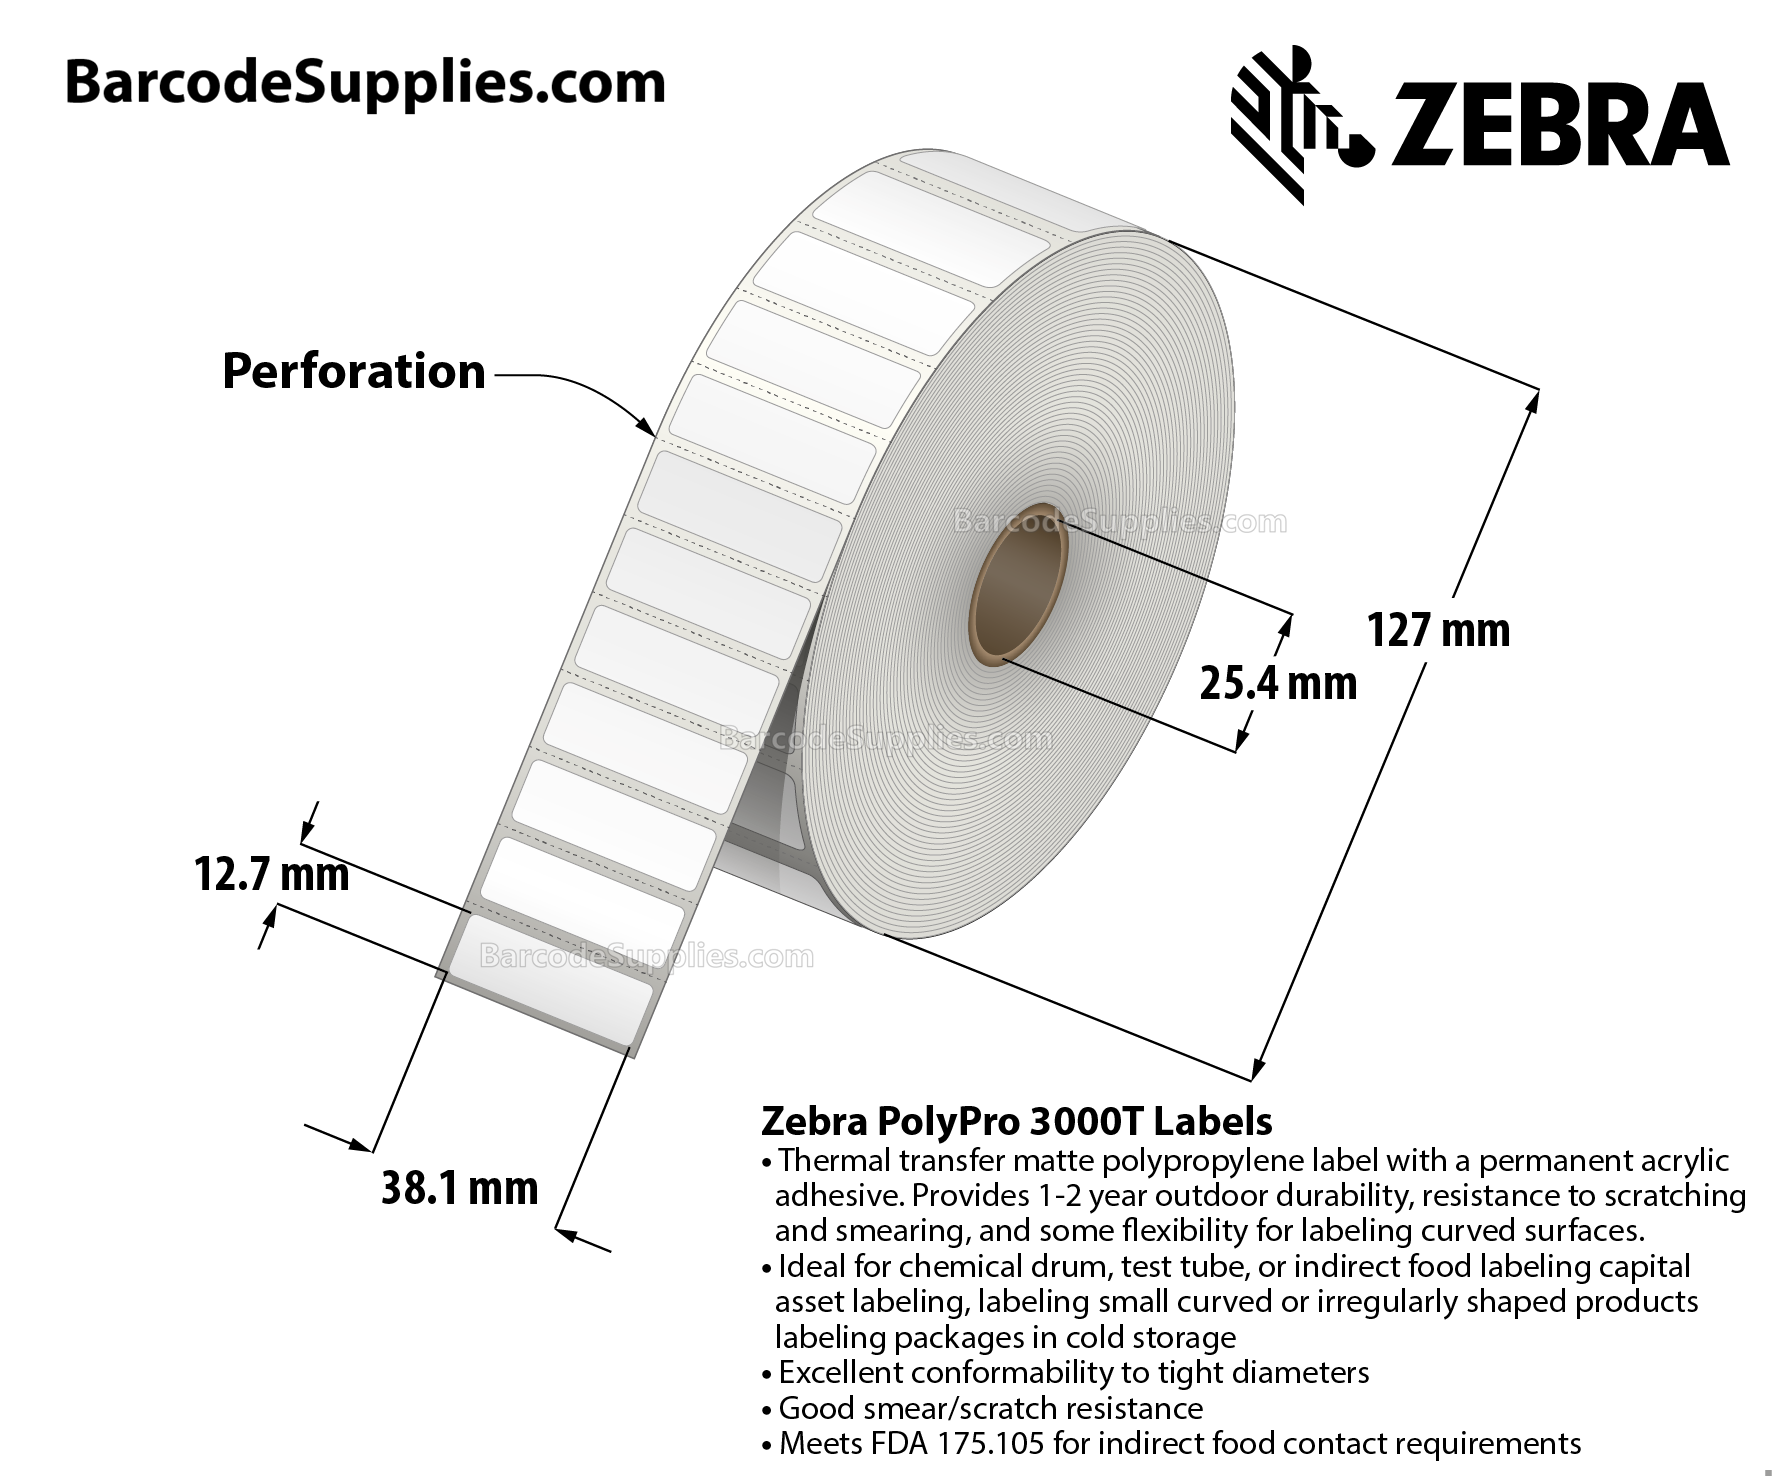 1.5 x 0.5 Thermal Transfer White PolyPro 3000T Labels With Permanent Adhesive - - Perforated - 3780 Labels Per Roll - Carton Of 8 Rolls - 30240 Labels Total - MPN: 18930